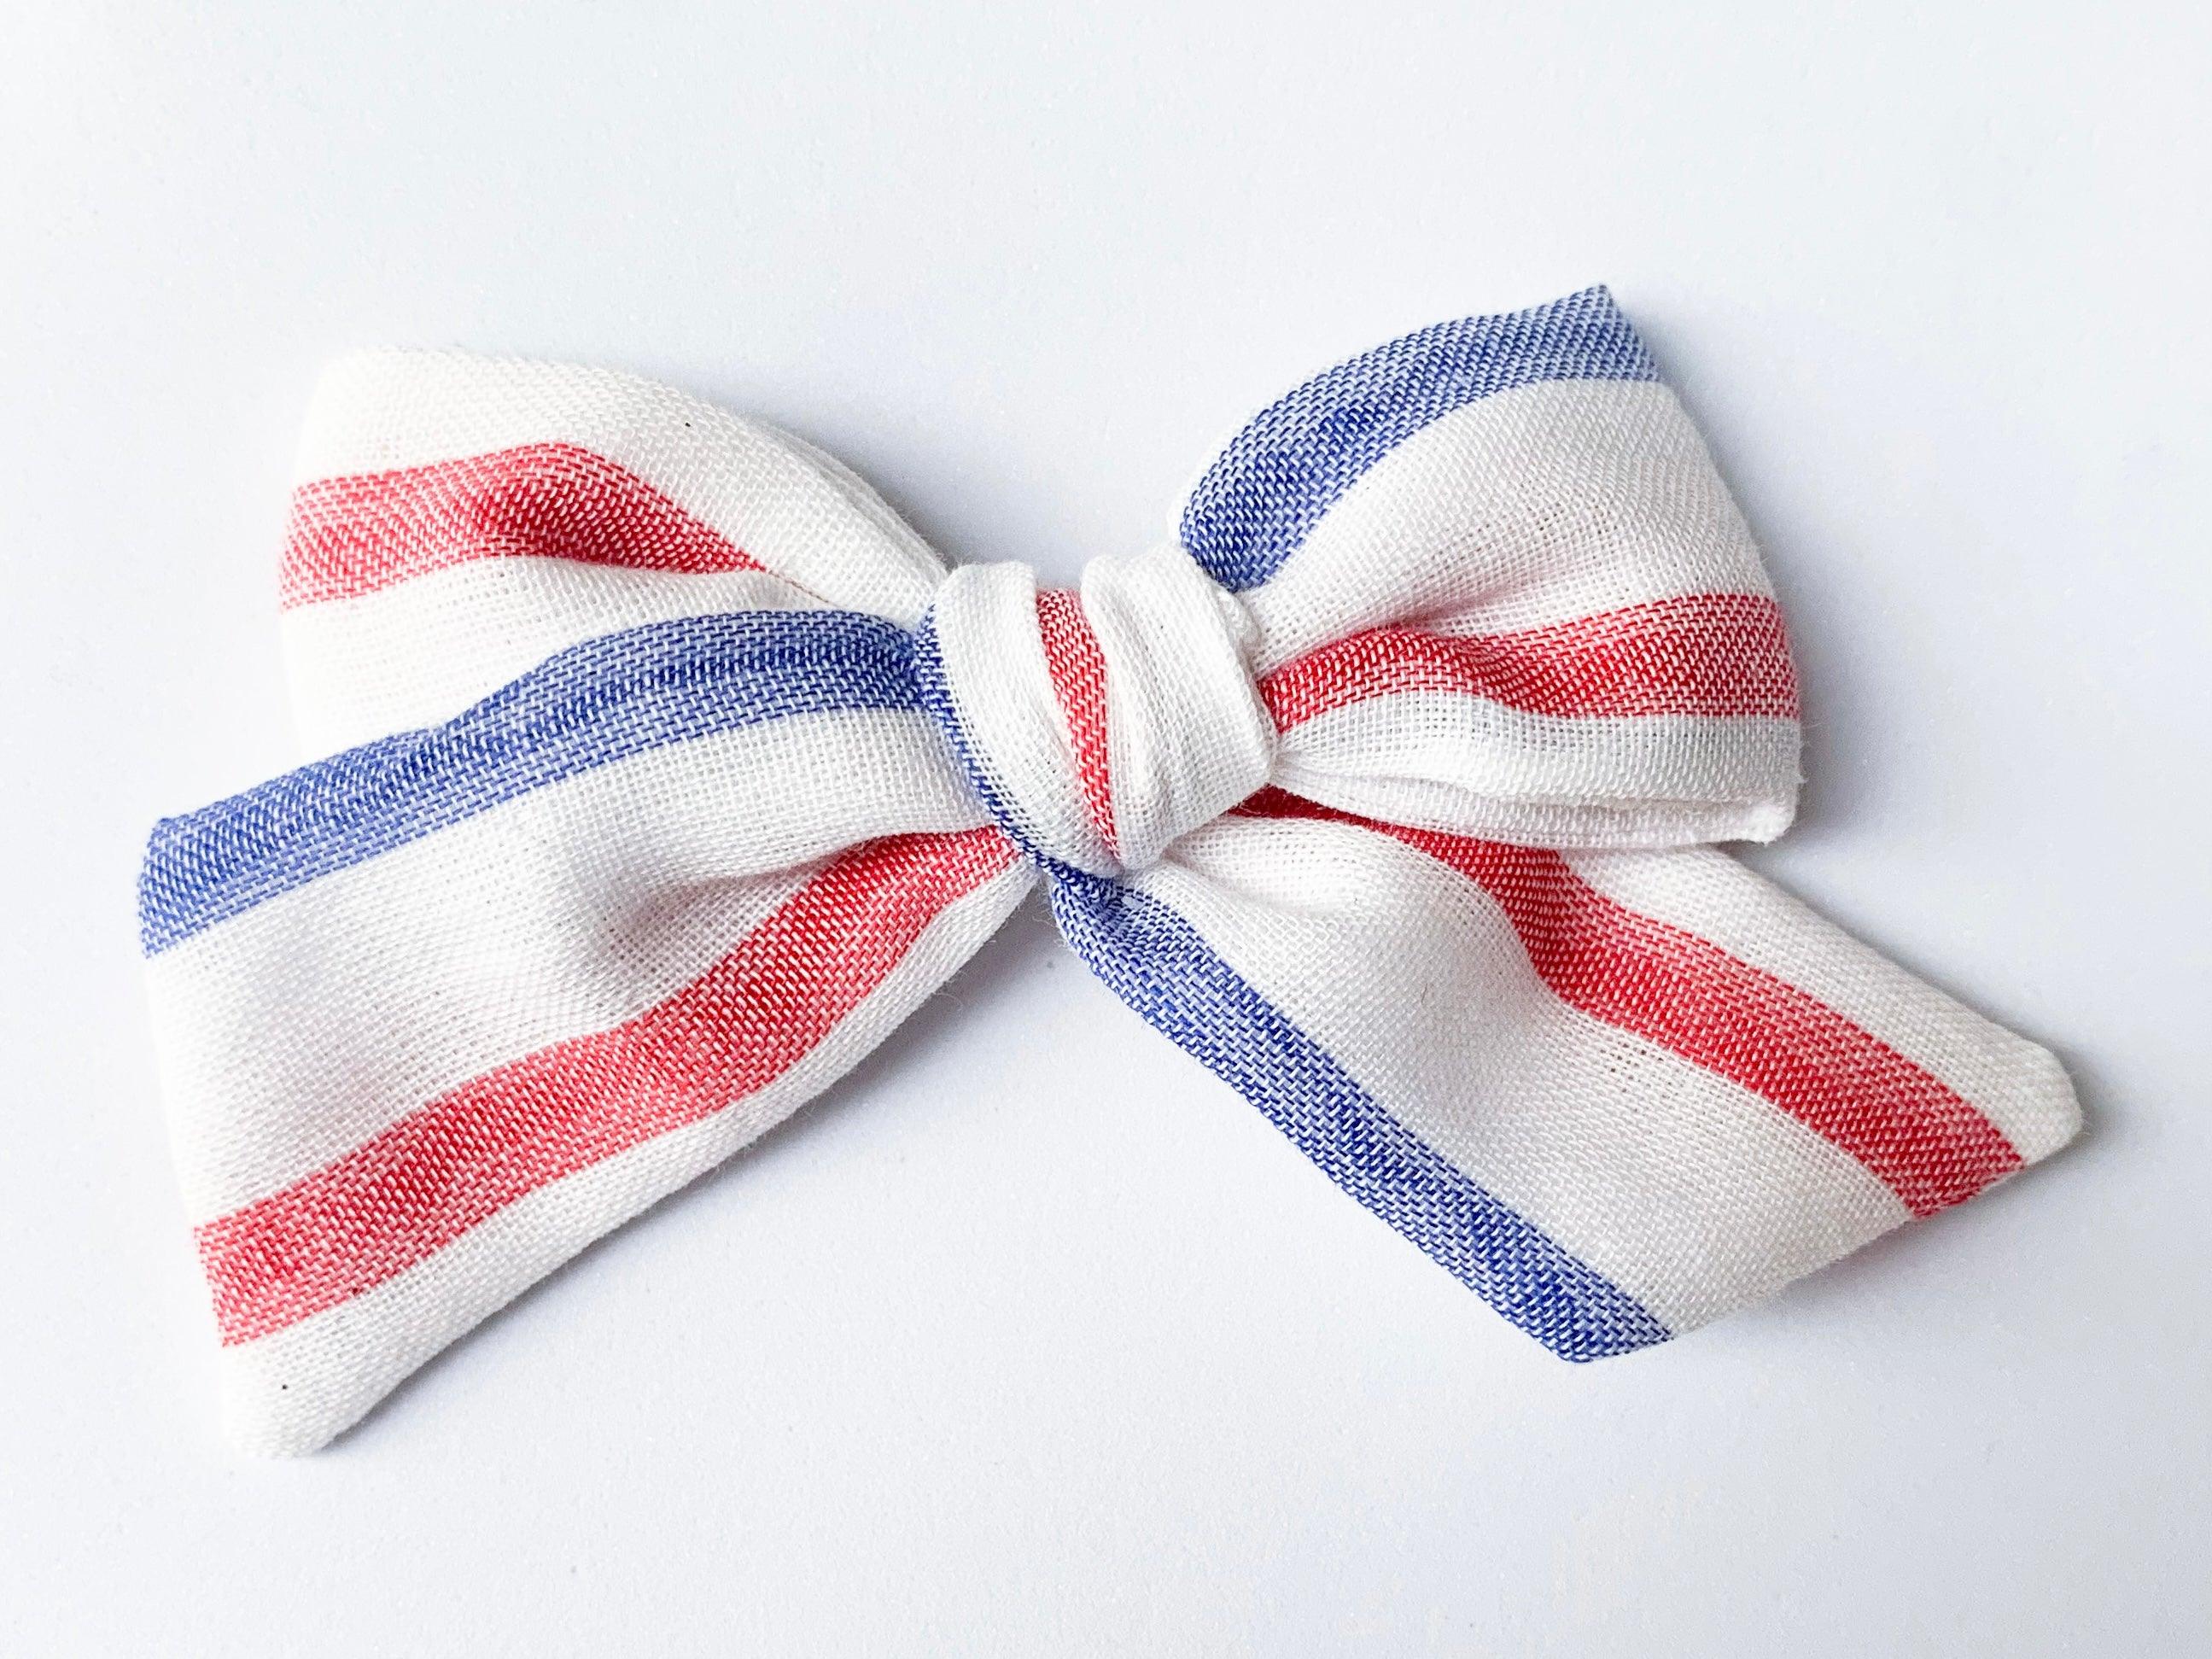 Pinwheel Bow - Patriotic Stripe | Nashville Bow Co. - Classic Hair Bows, Bow Ties, Basket Bows, Pacifier Clips, Wreath Sashes, Swaddle Bows. Classic Southern Charm.